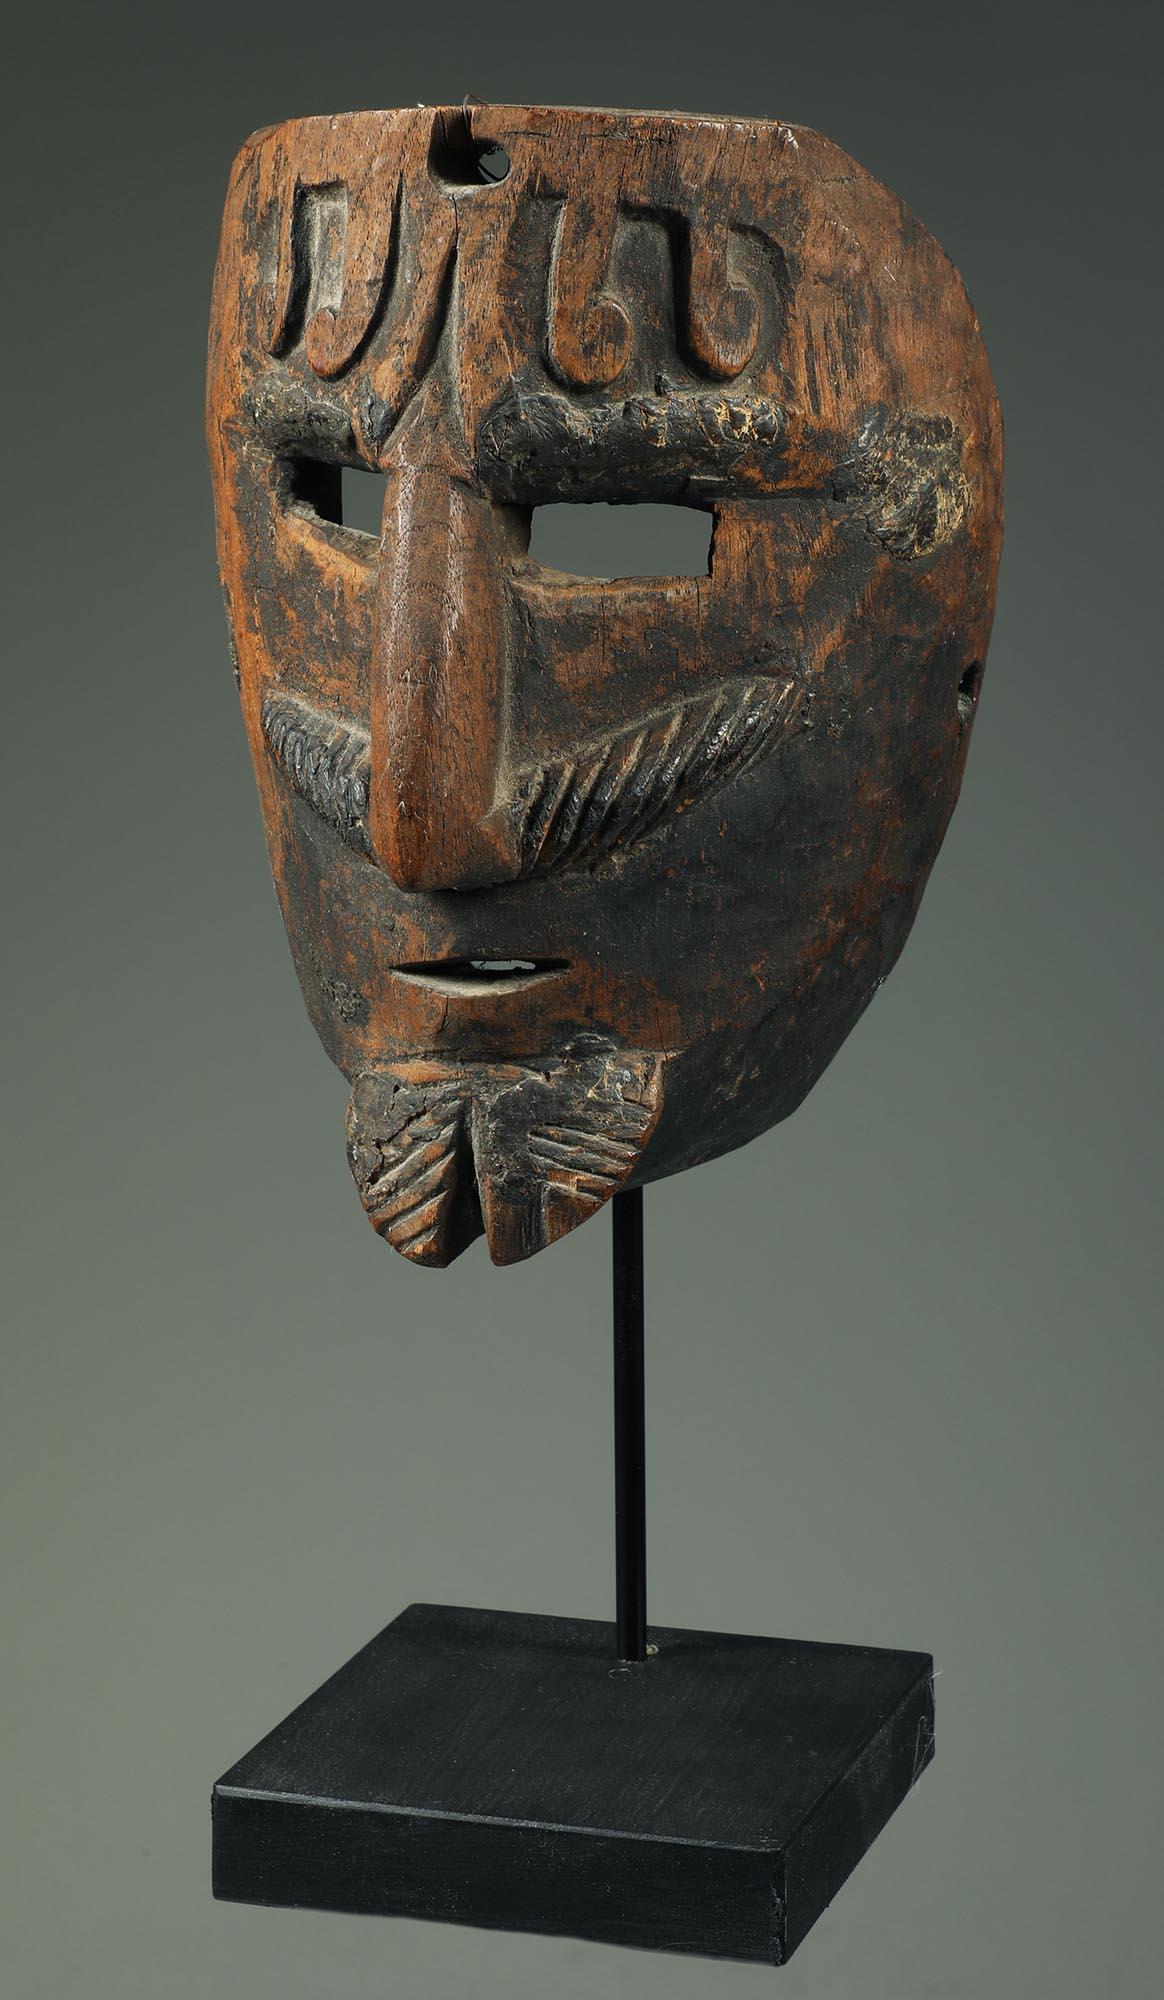 Early hardwood Mexican mask, representing a man with moustache and beard with curly hair on forehead.  Heavy staining and wear inside from traditional use, faint traces of pigments. Early to mid-20th century.  the mask is 8 inches high, on metal and